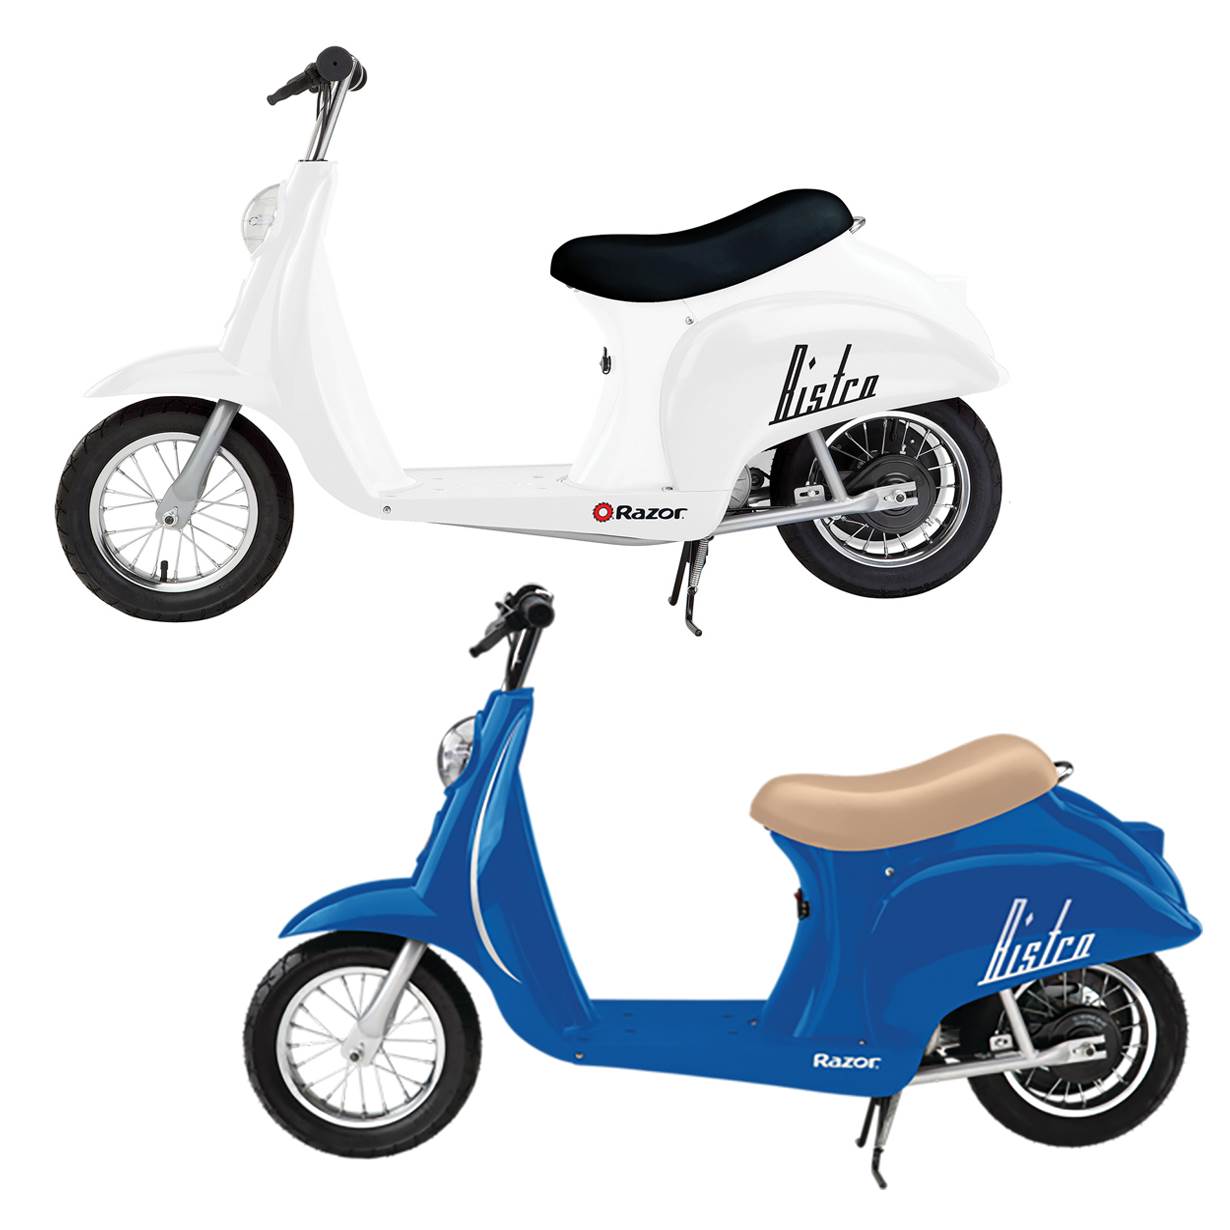 Pocket Mod Euro 24v 250w Electric Motor Scooter (2-pack), White and Blue Rubber | - Razor 111109